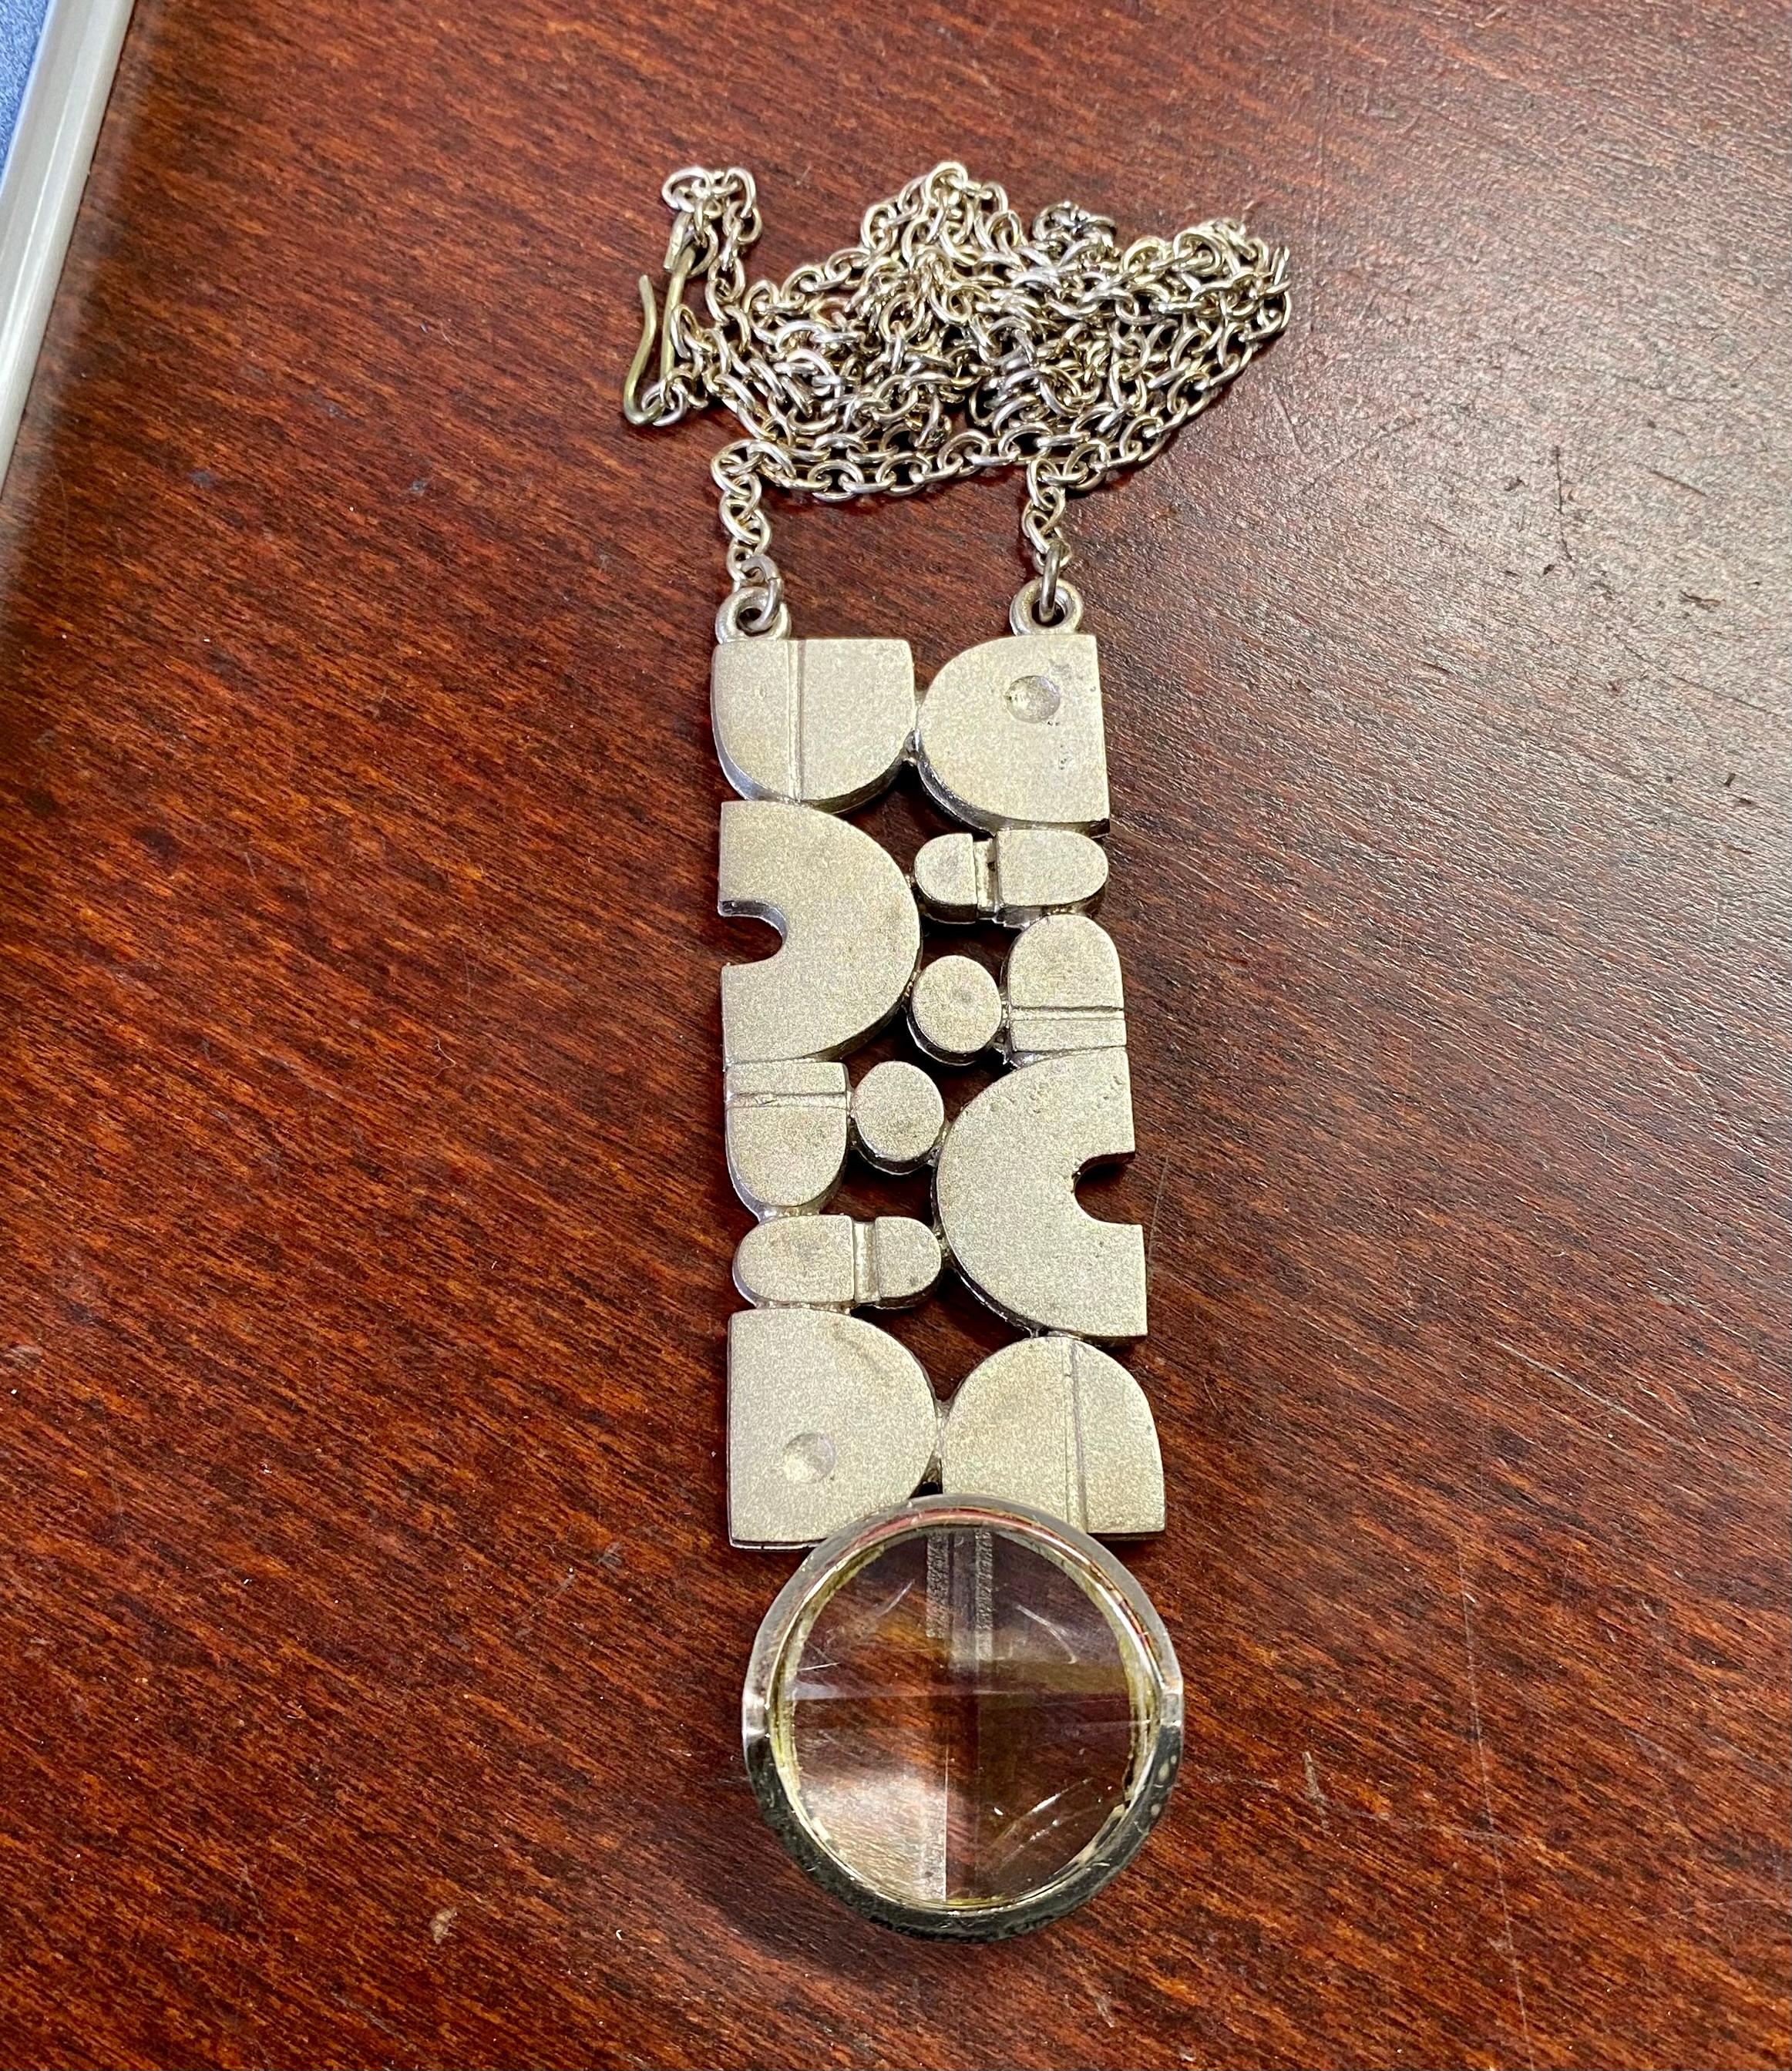 Silver Jorma Laine Turun Hopea 1973 Necklace
With rock crystal
Really big and showy.
New unused Necklace from 1973.
Goldsmith's old warehouse.

I also have a lot of other Jorma Laine Unused jewelry for sale. See one picture with a collection of old,